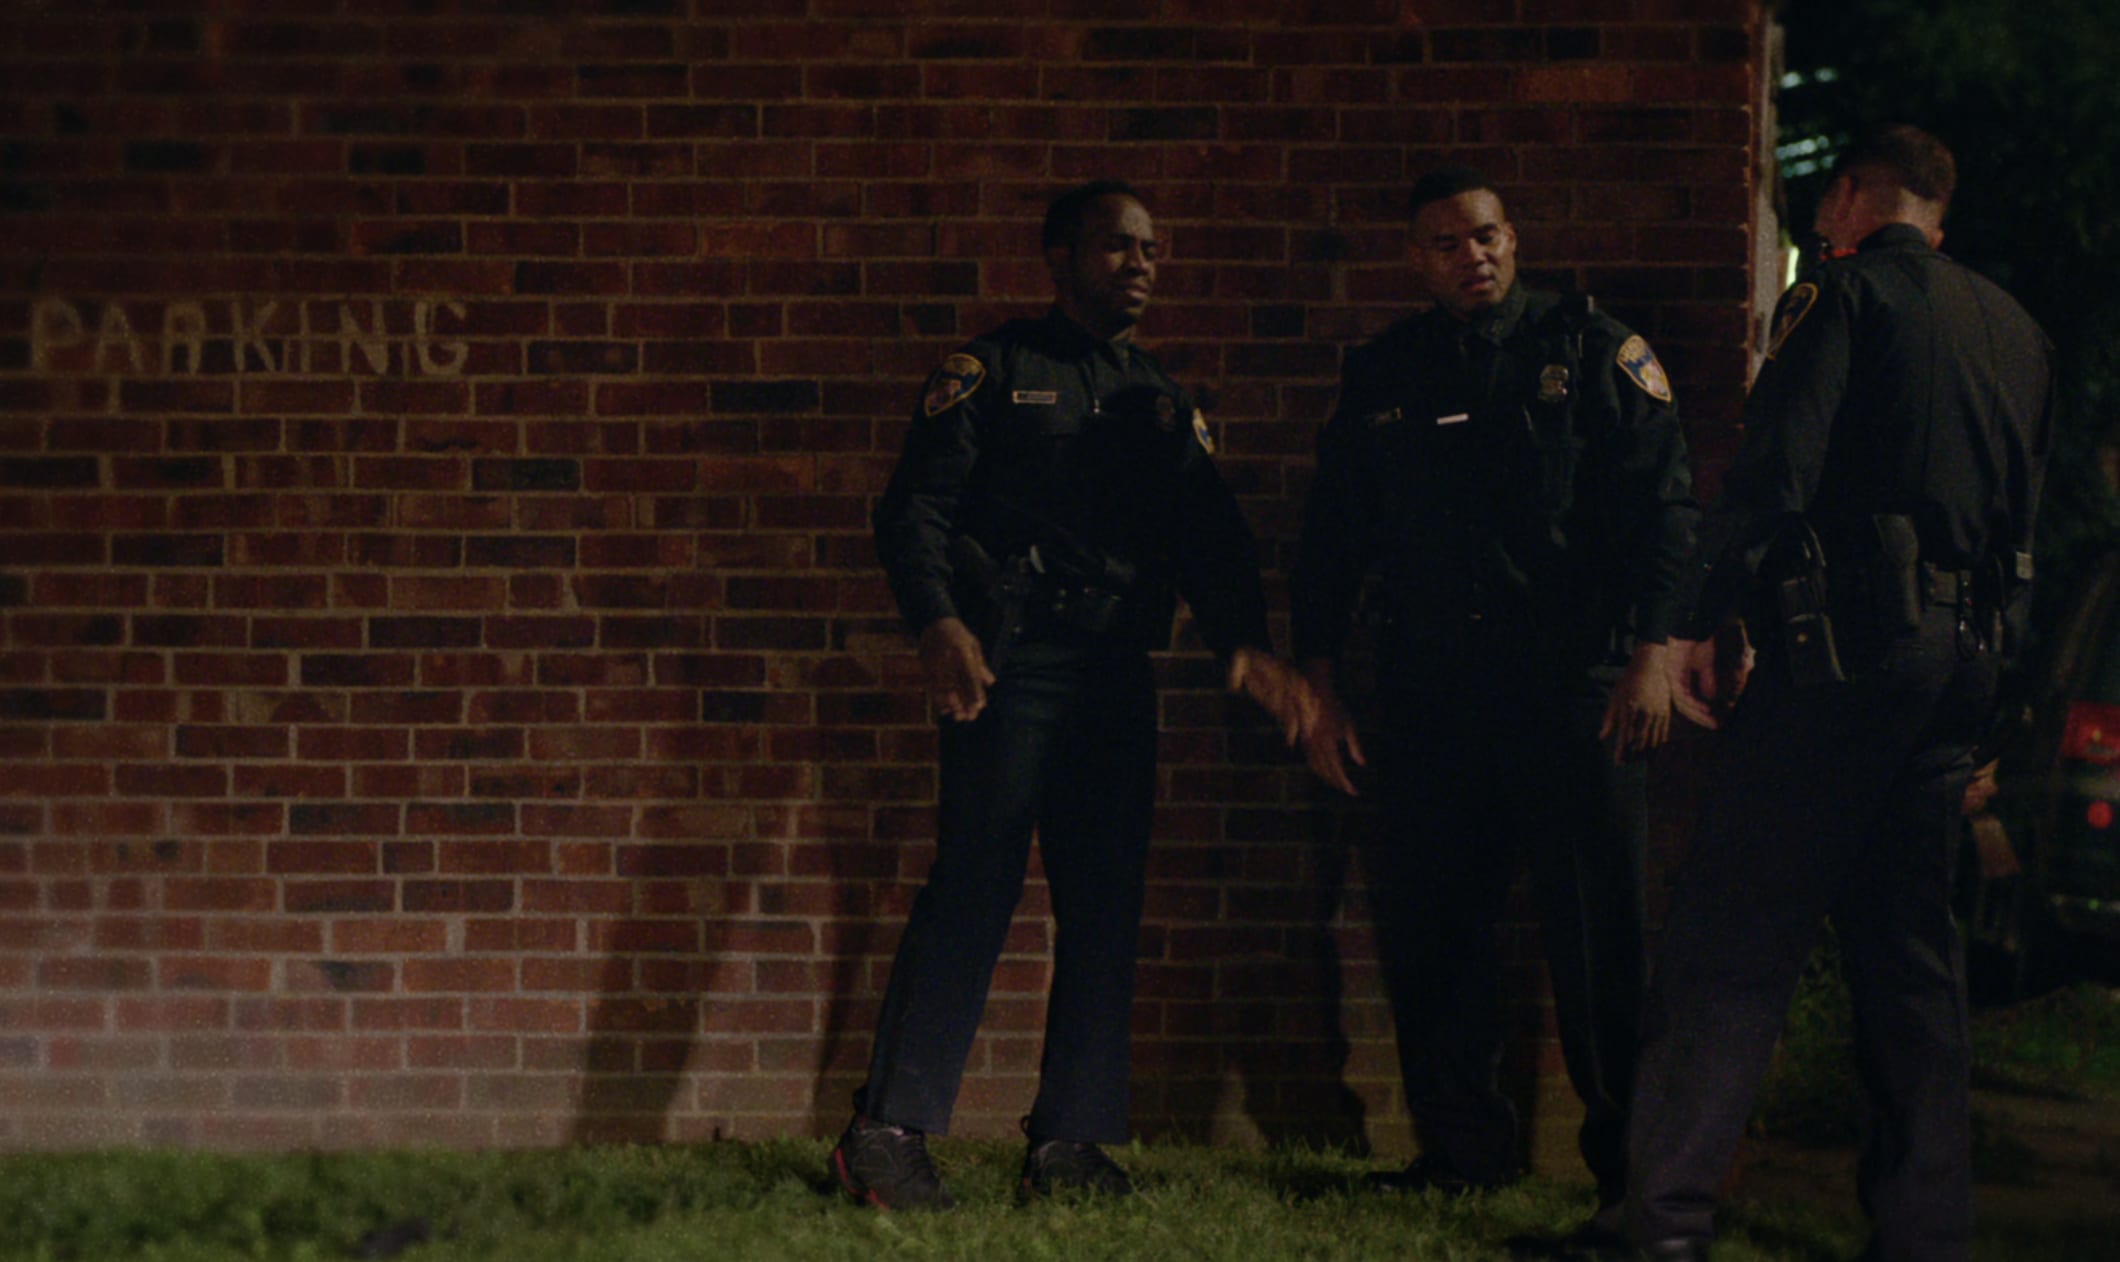 Police officers in Baltimore in the HBO series We Own This City, one of them wearing Air Jordan 7s